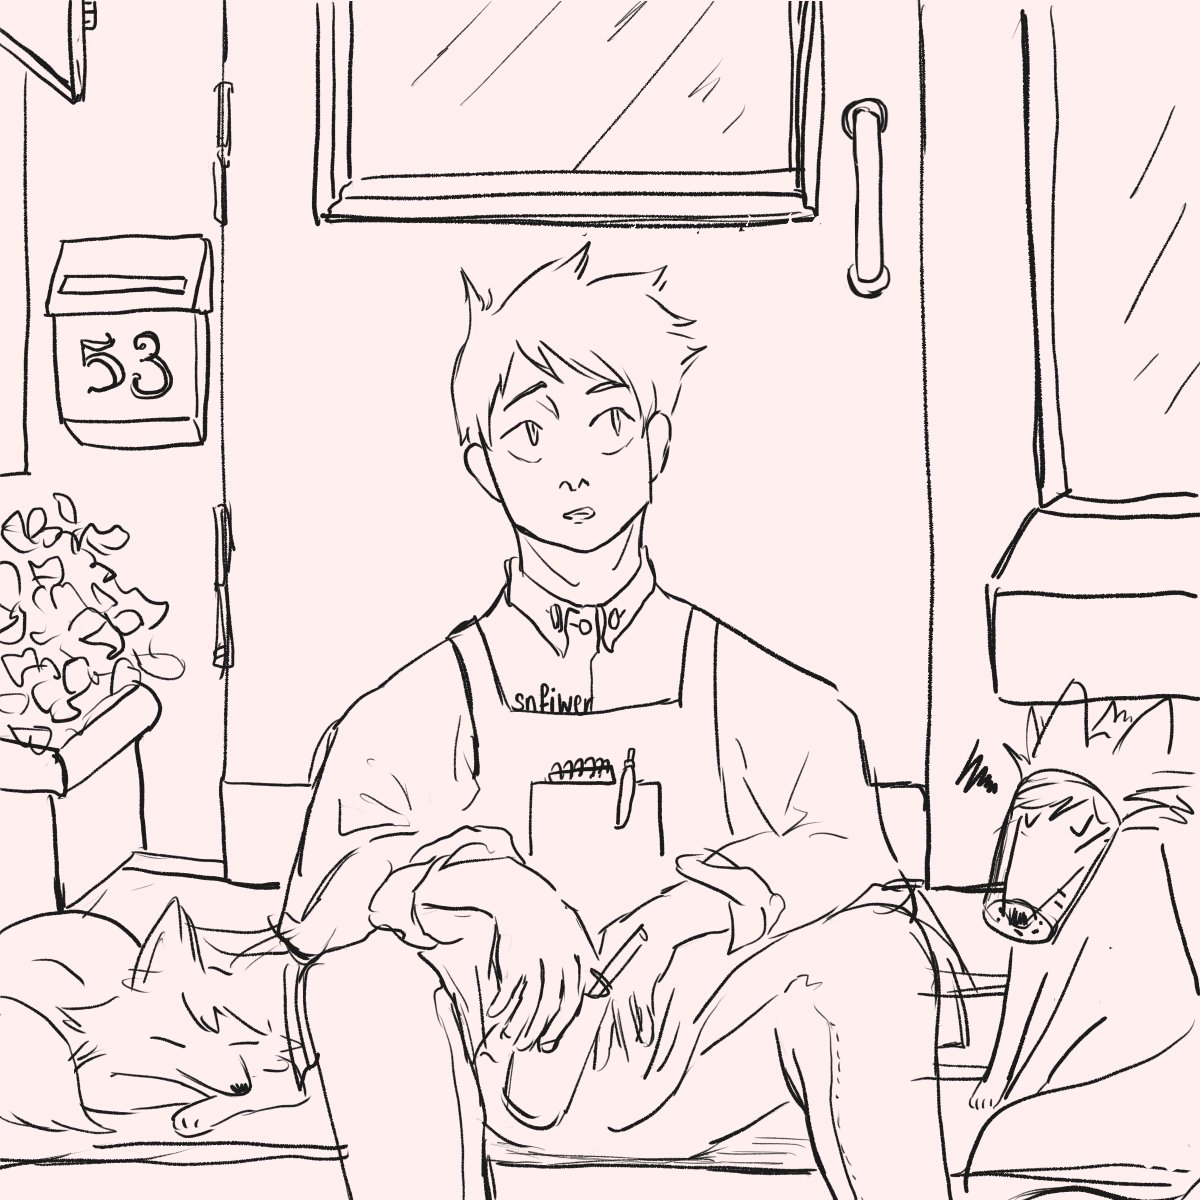 part 2! akagi accidentally adopts the foxes and tells them about his existential crisis